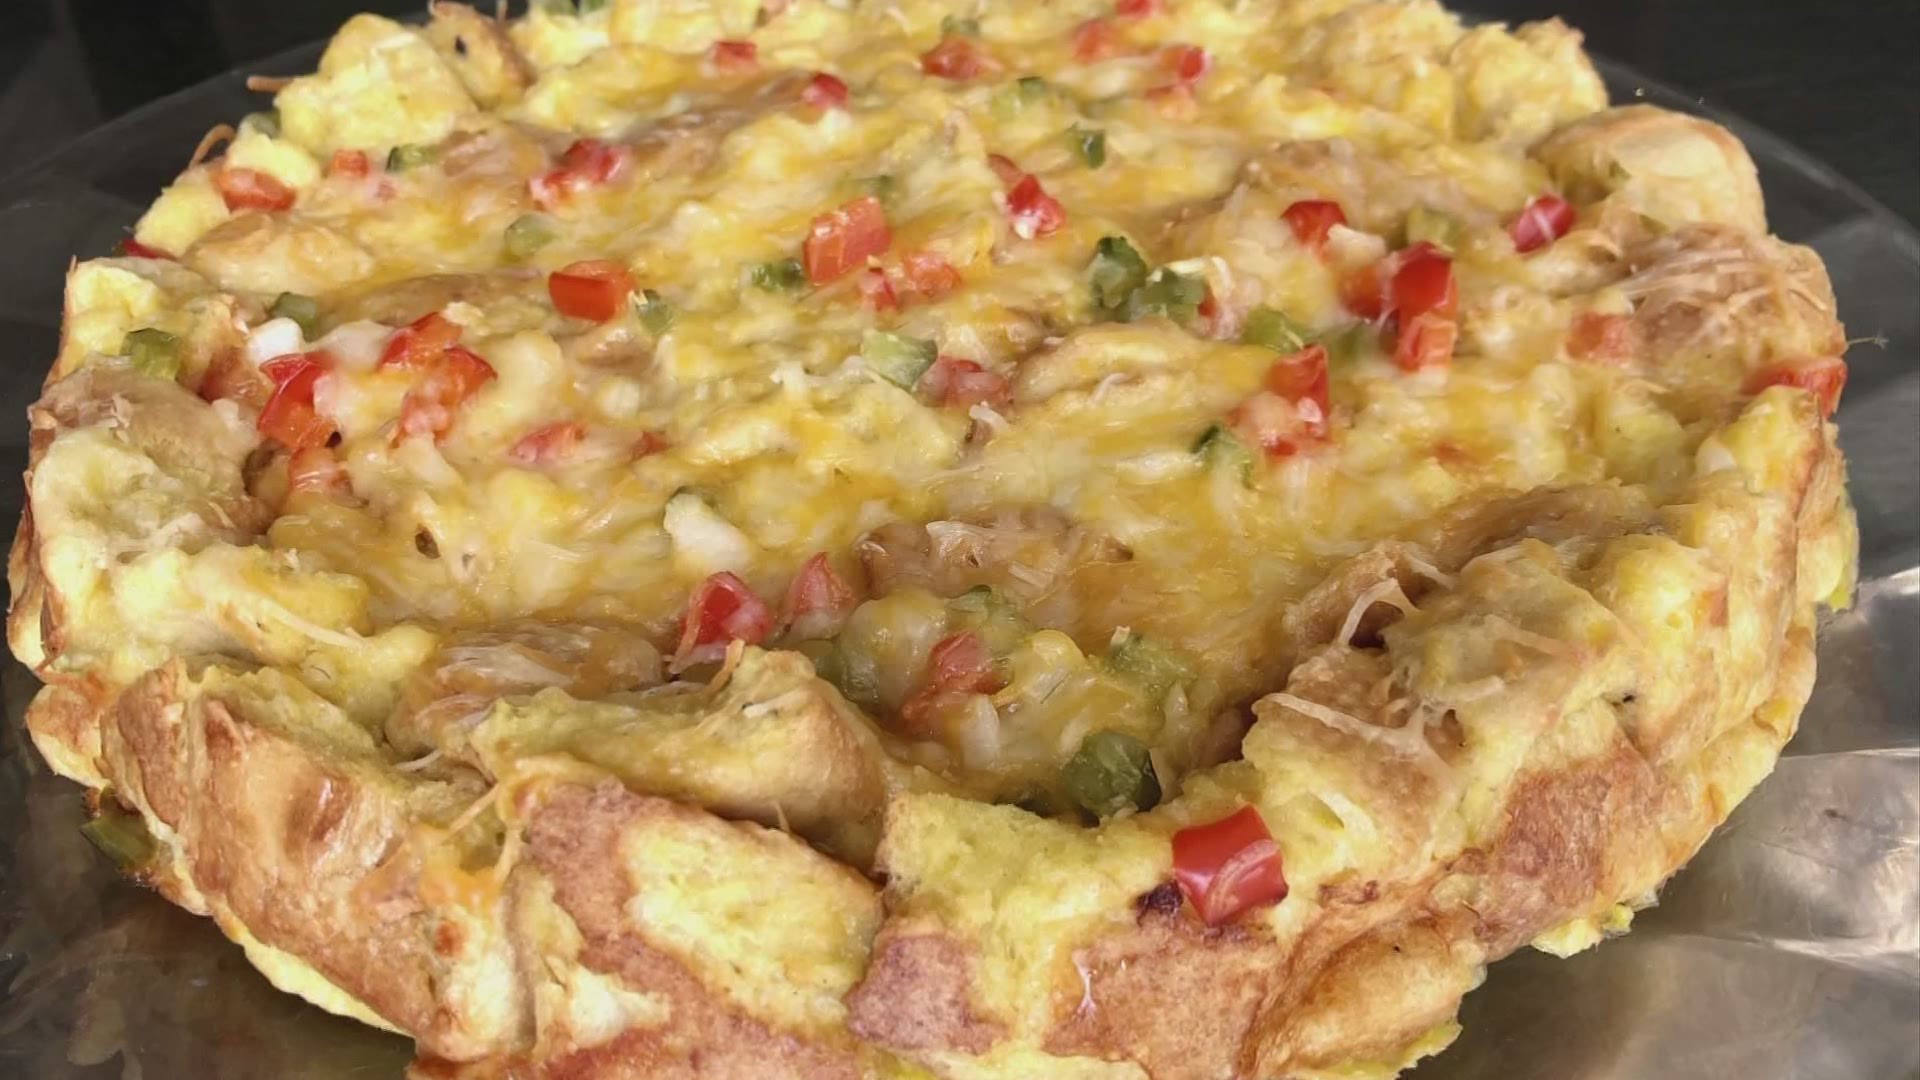 A breakfast strata pairs well with a mimosa.